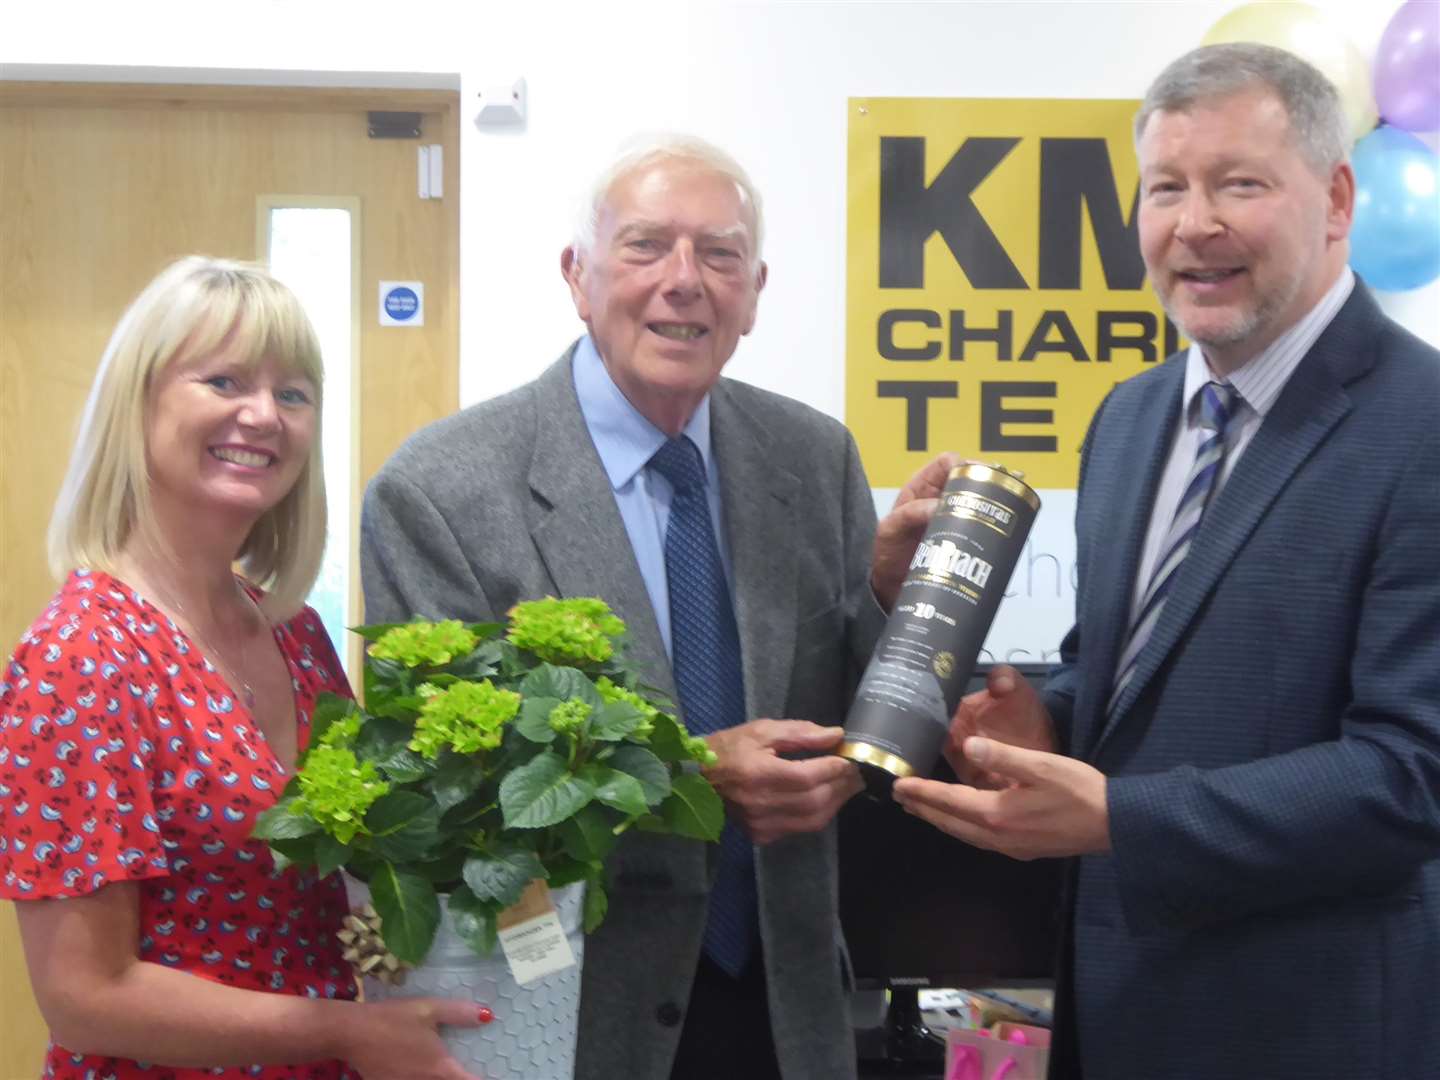 Martin Vye, centre, who is stepping down as chairman of the board of trustees for the KM Charity Team, receives gifts from Karen Brinkman and Simon Dolby in thanks for his years of service. (2747587)